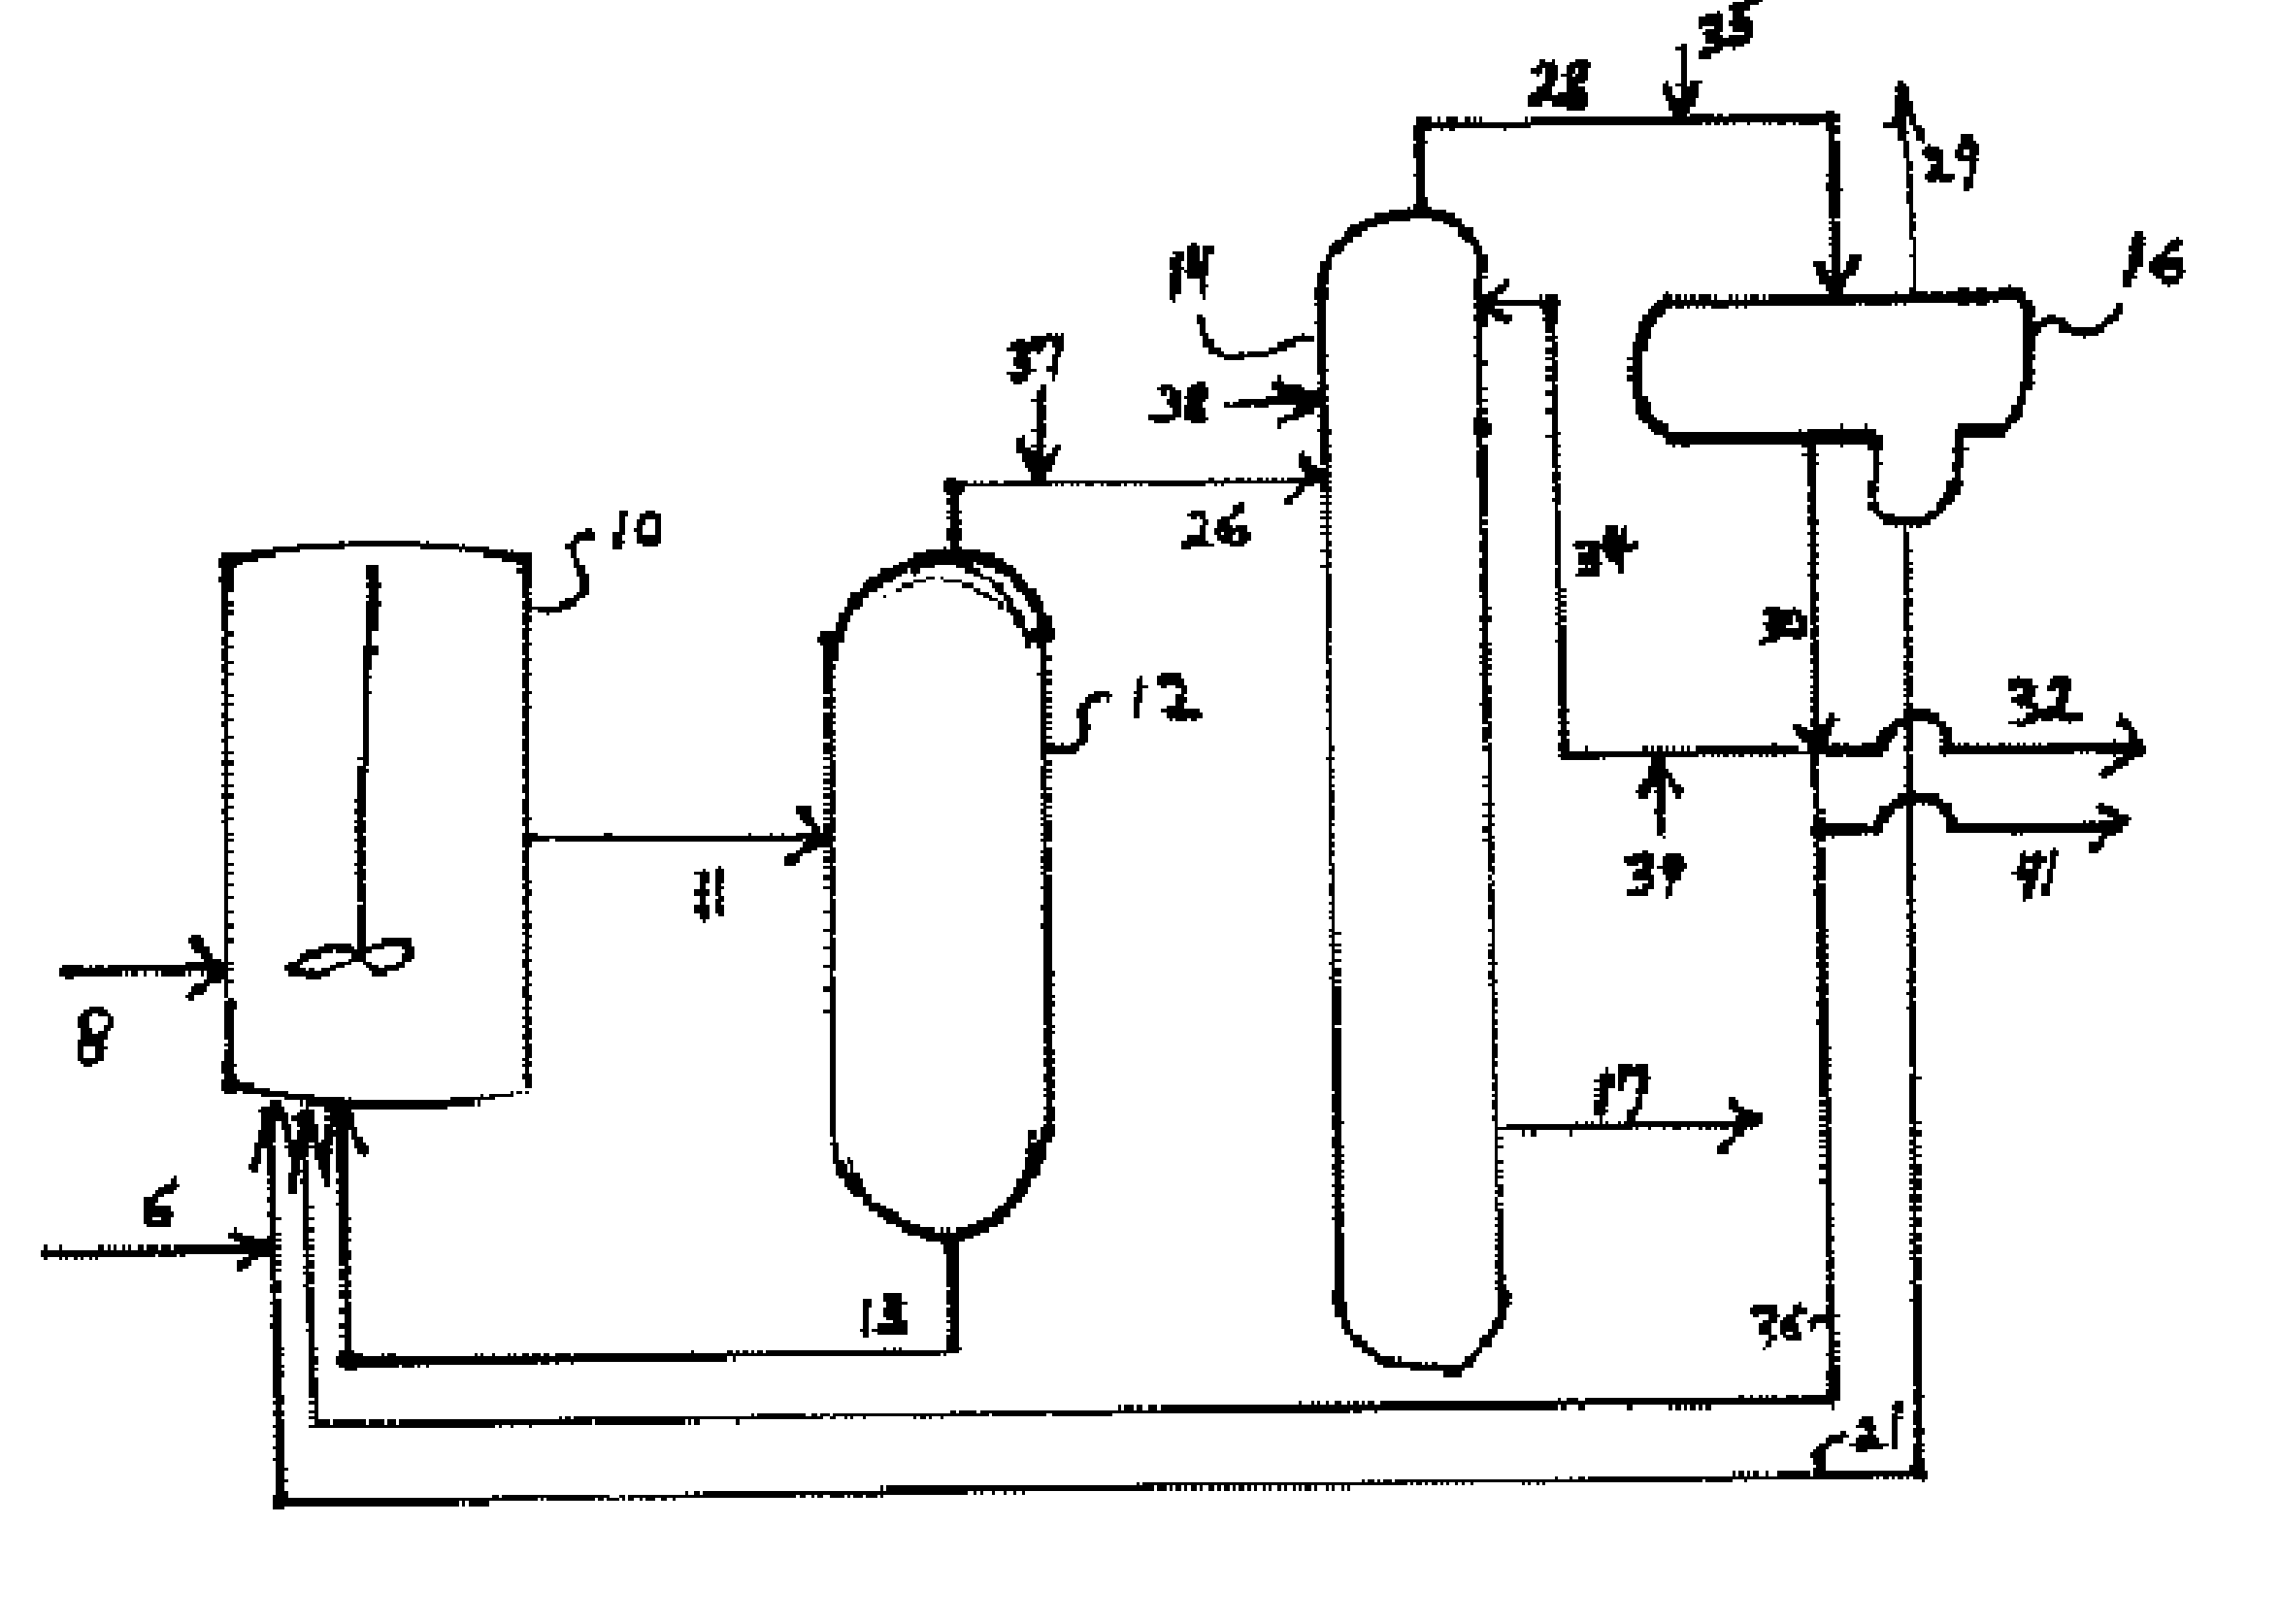 Process for Producing Acetic Acid